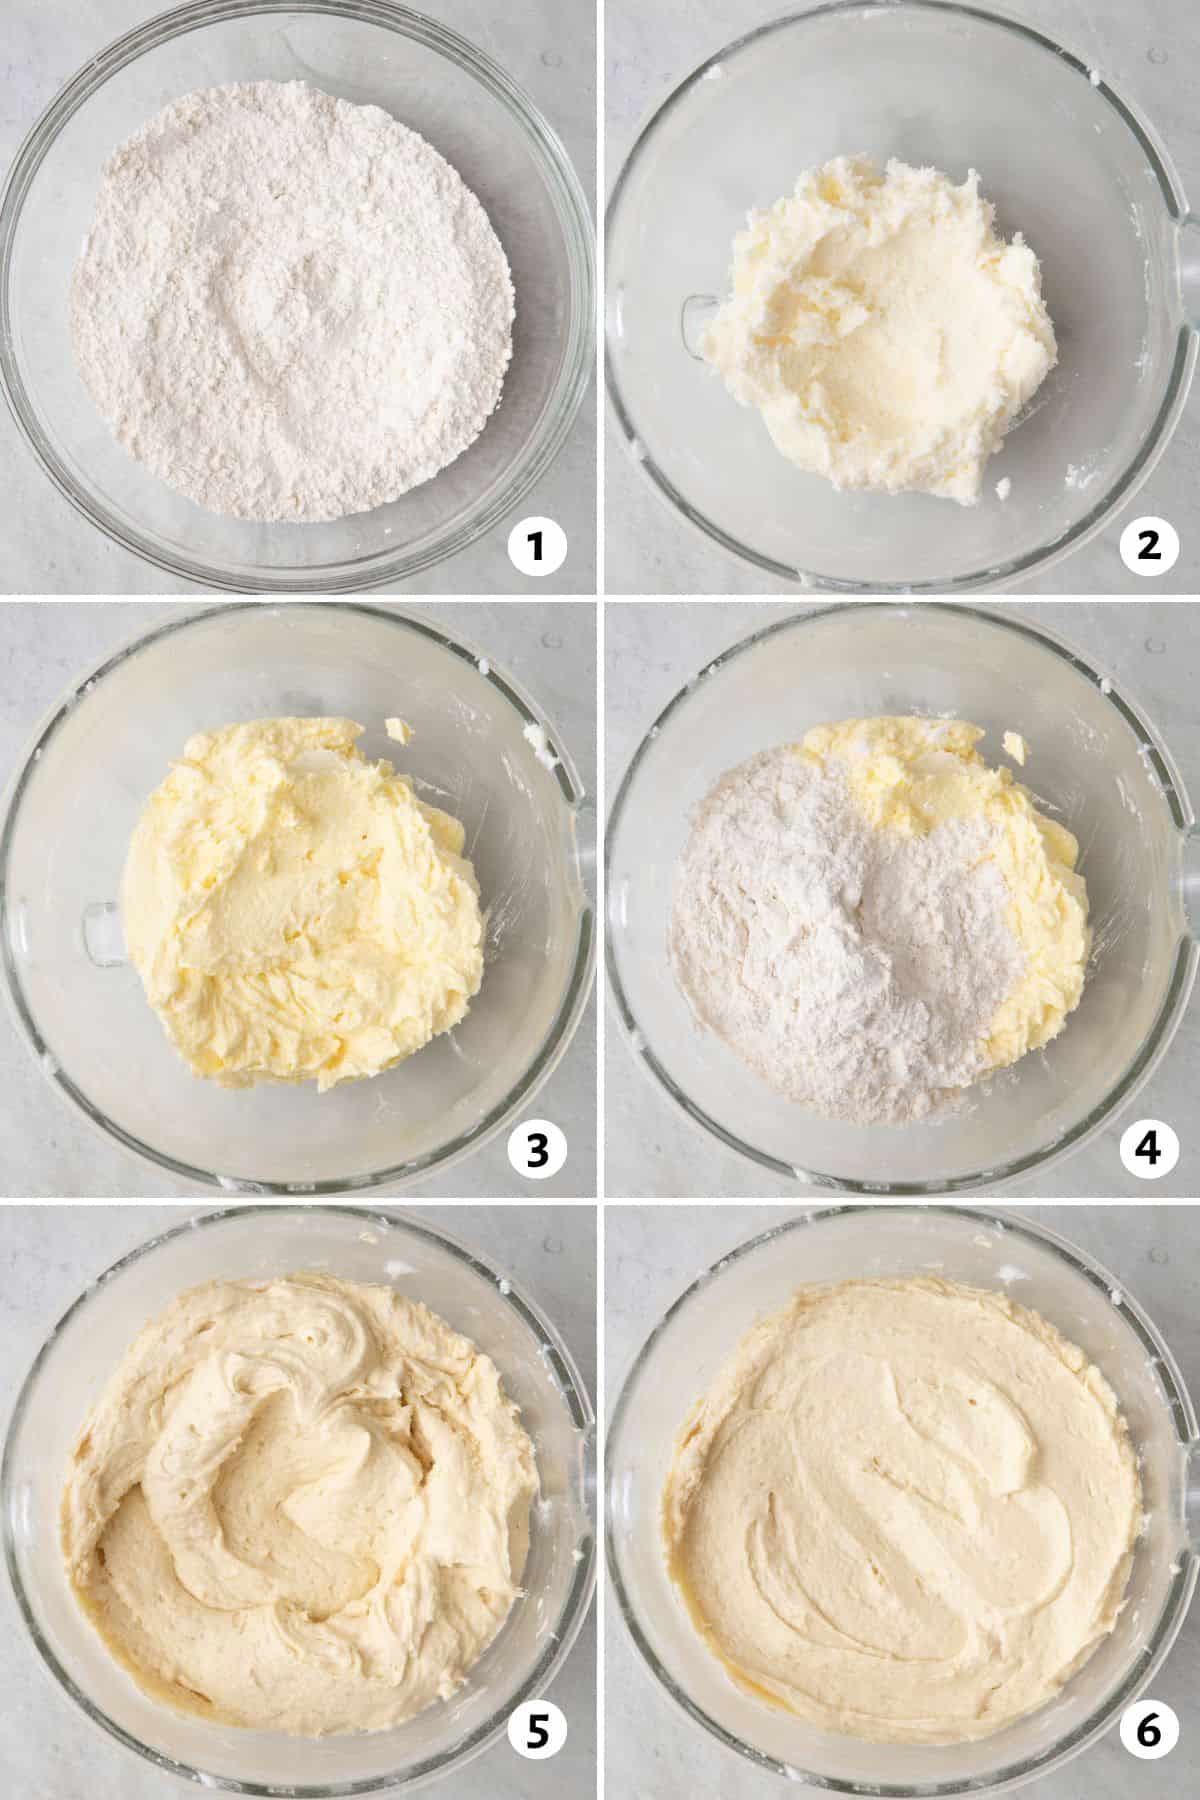 6 image collage mixing cake batter recipe: 1- combine dry ingredients, 2- creamed butter and sugar, 3- eggs mixed into butter mix, 4- some flour added on top, 5 more flour mixed in, 6- all ingredients combined.